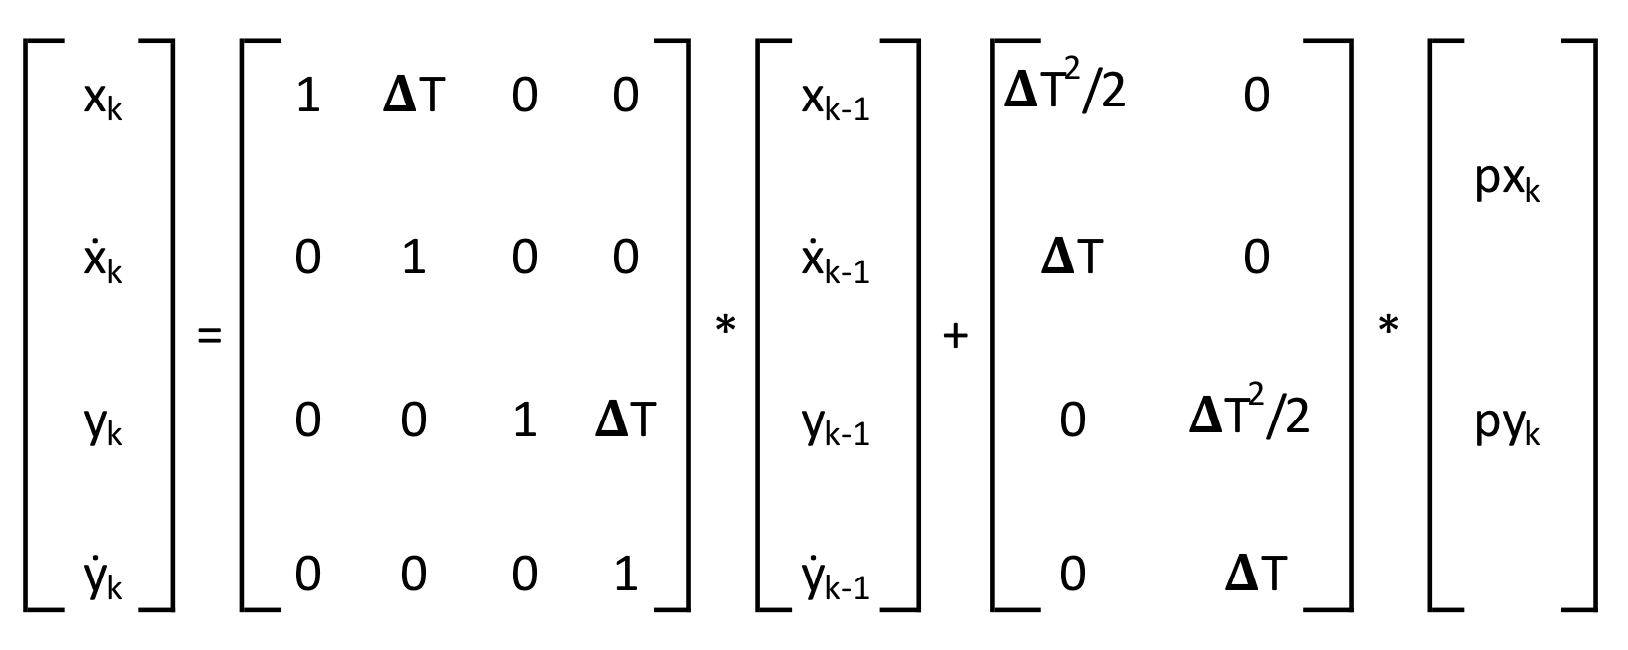 Linear dynamic equation of the system.